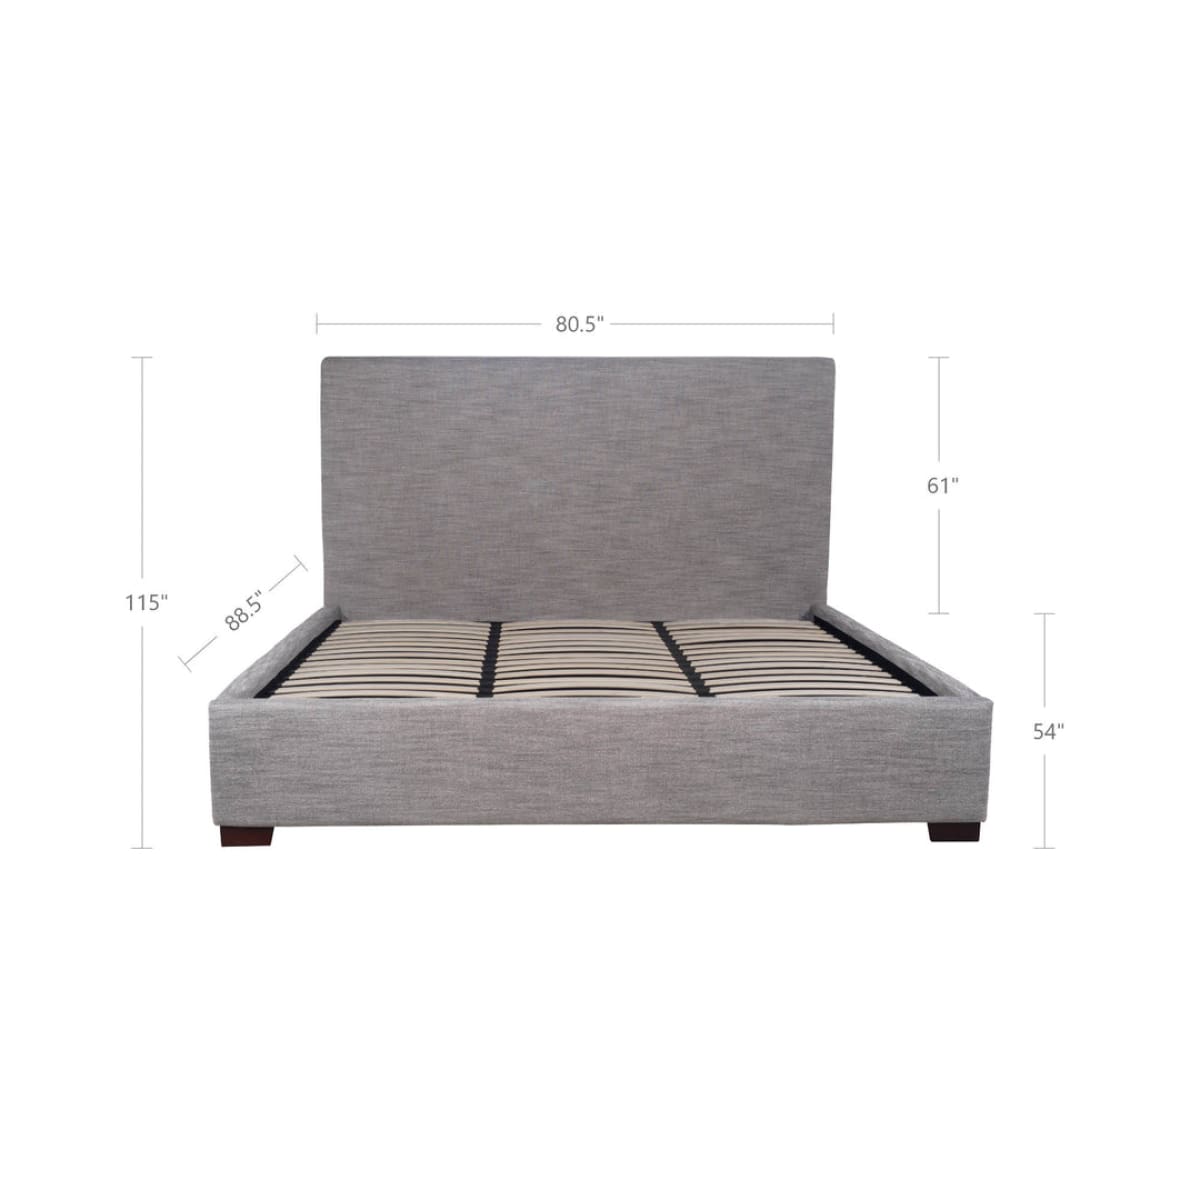 Finlay Storage King Bed - Dovetail Grey Linen - lh-import-beds